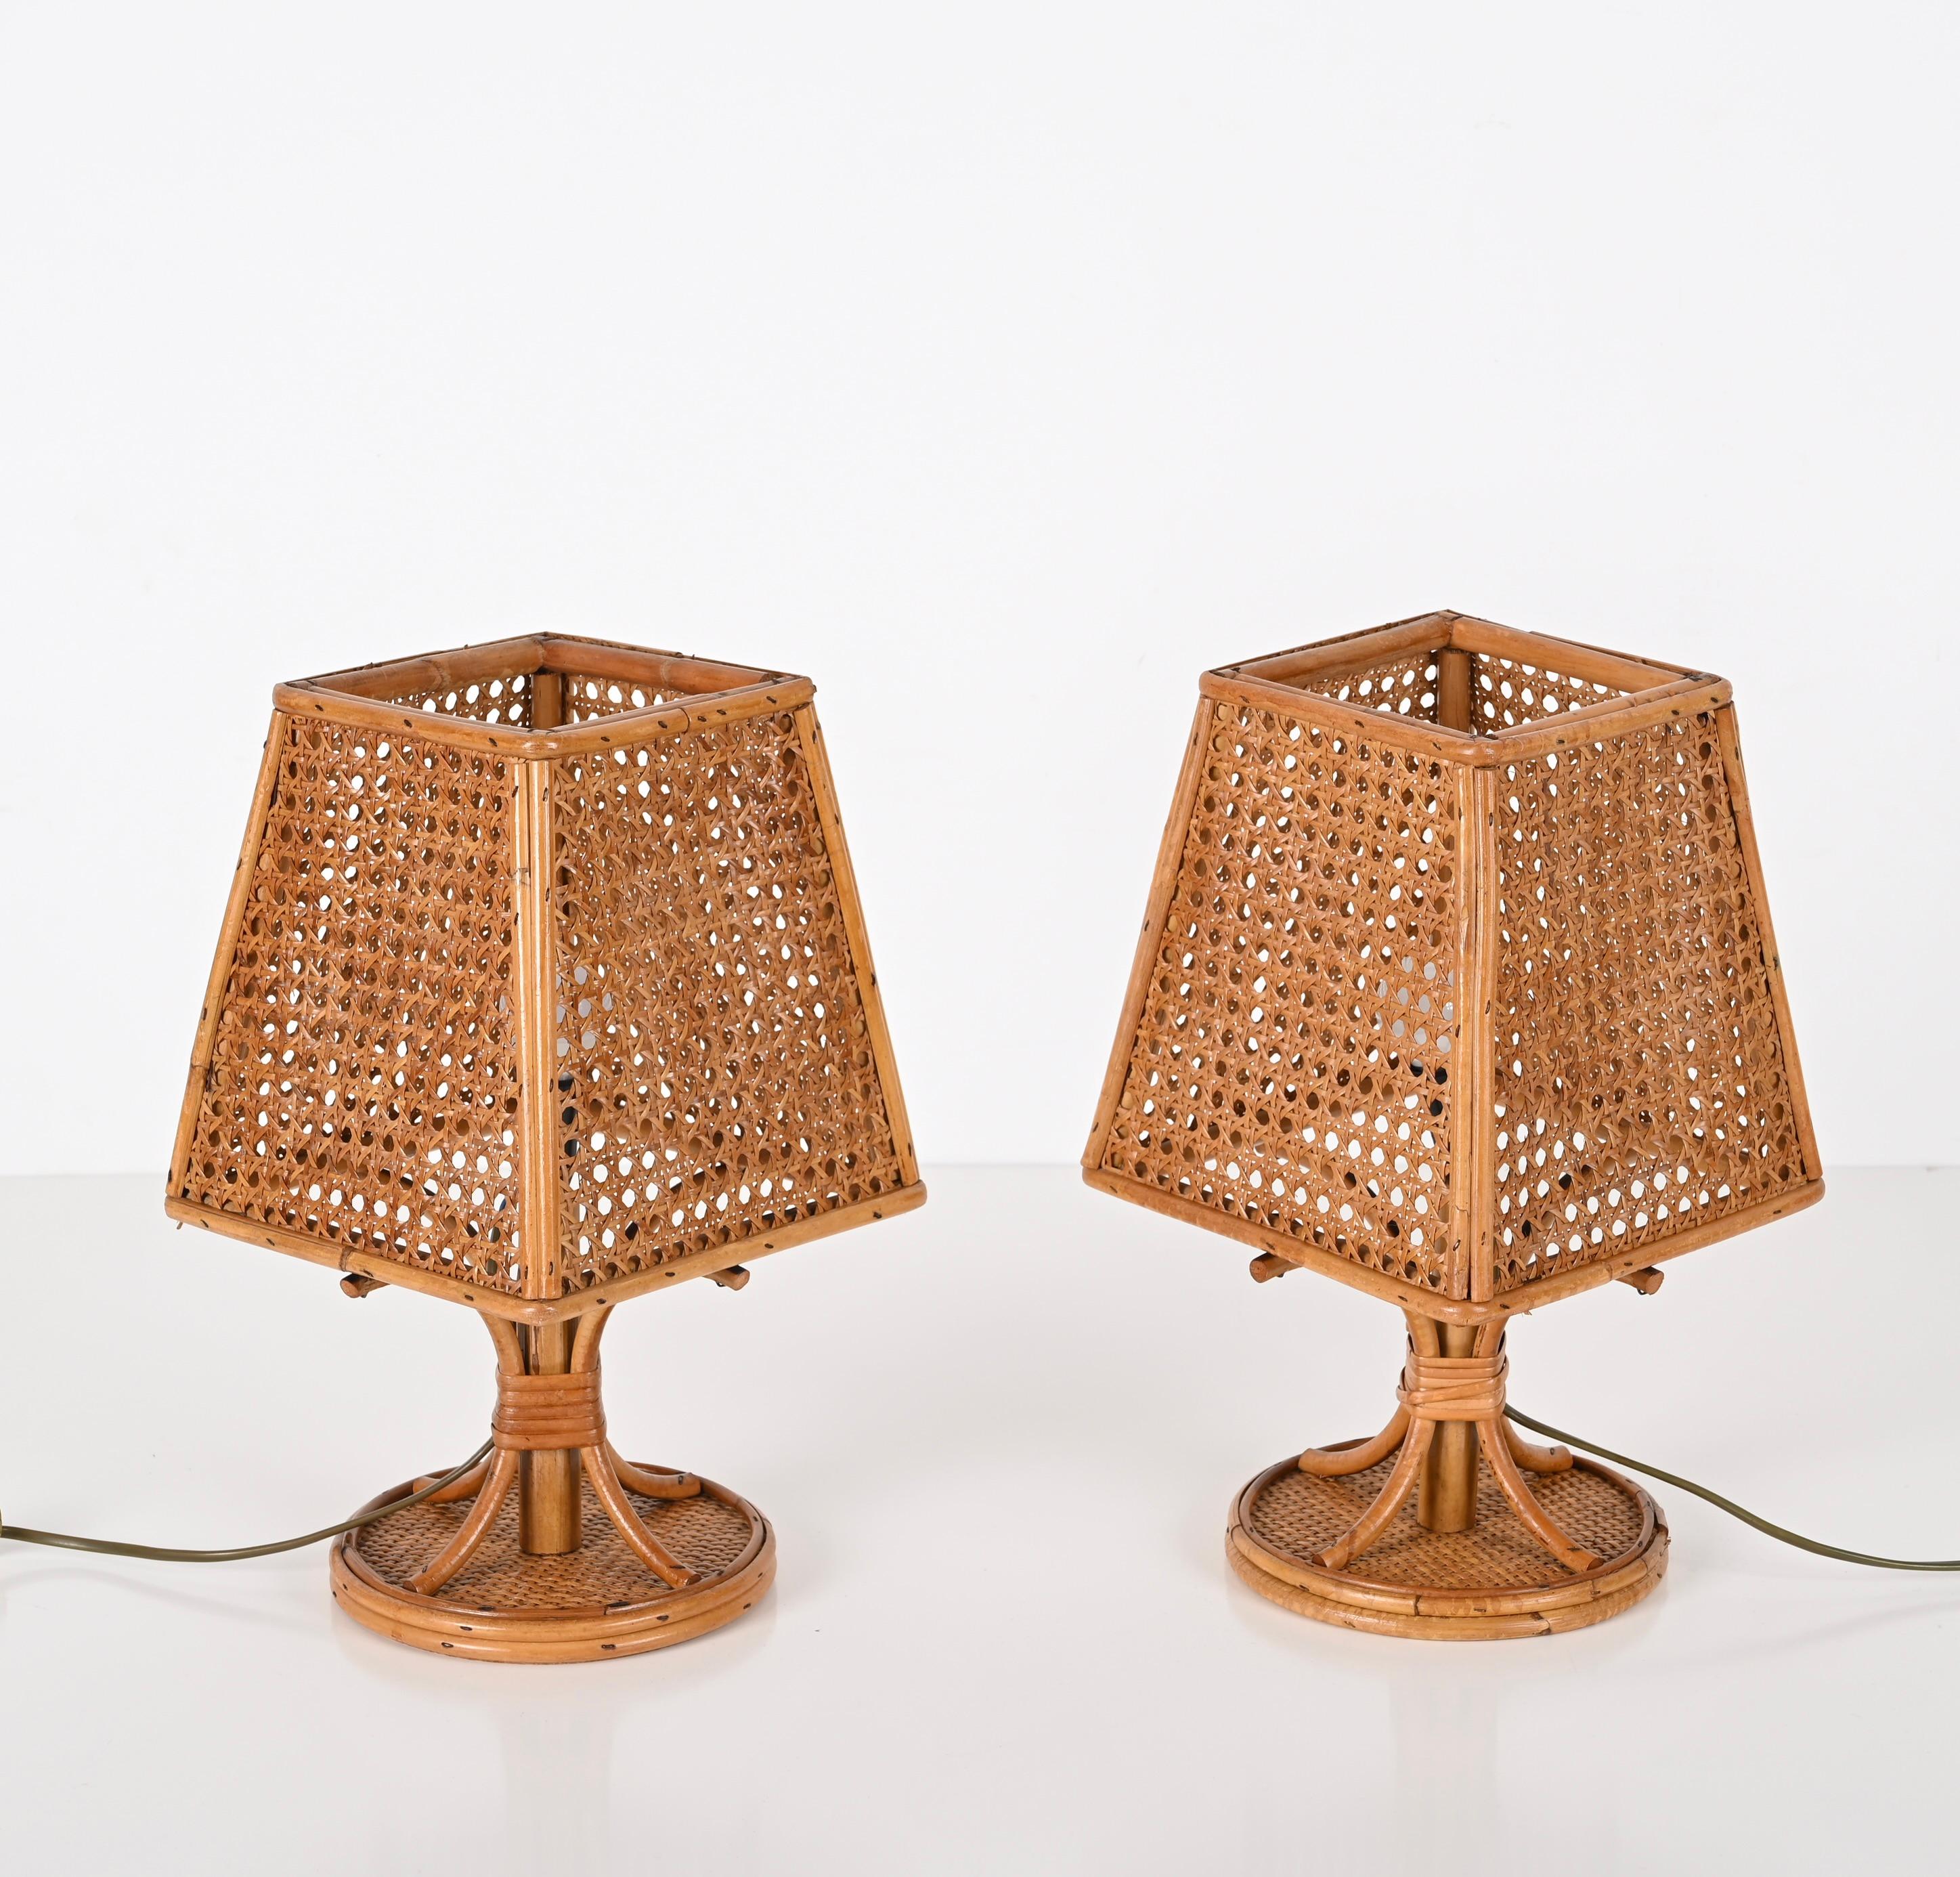 Bamboo Pair of French Riviera Table Lamps in Wicker and Rattan, Italy 1960s For Sale